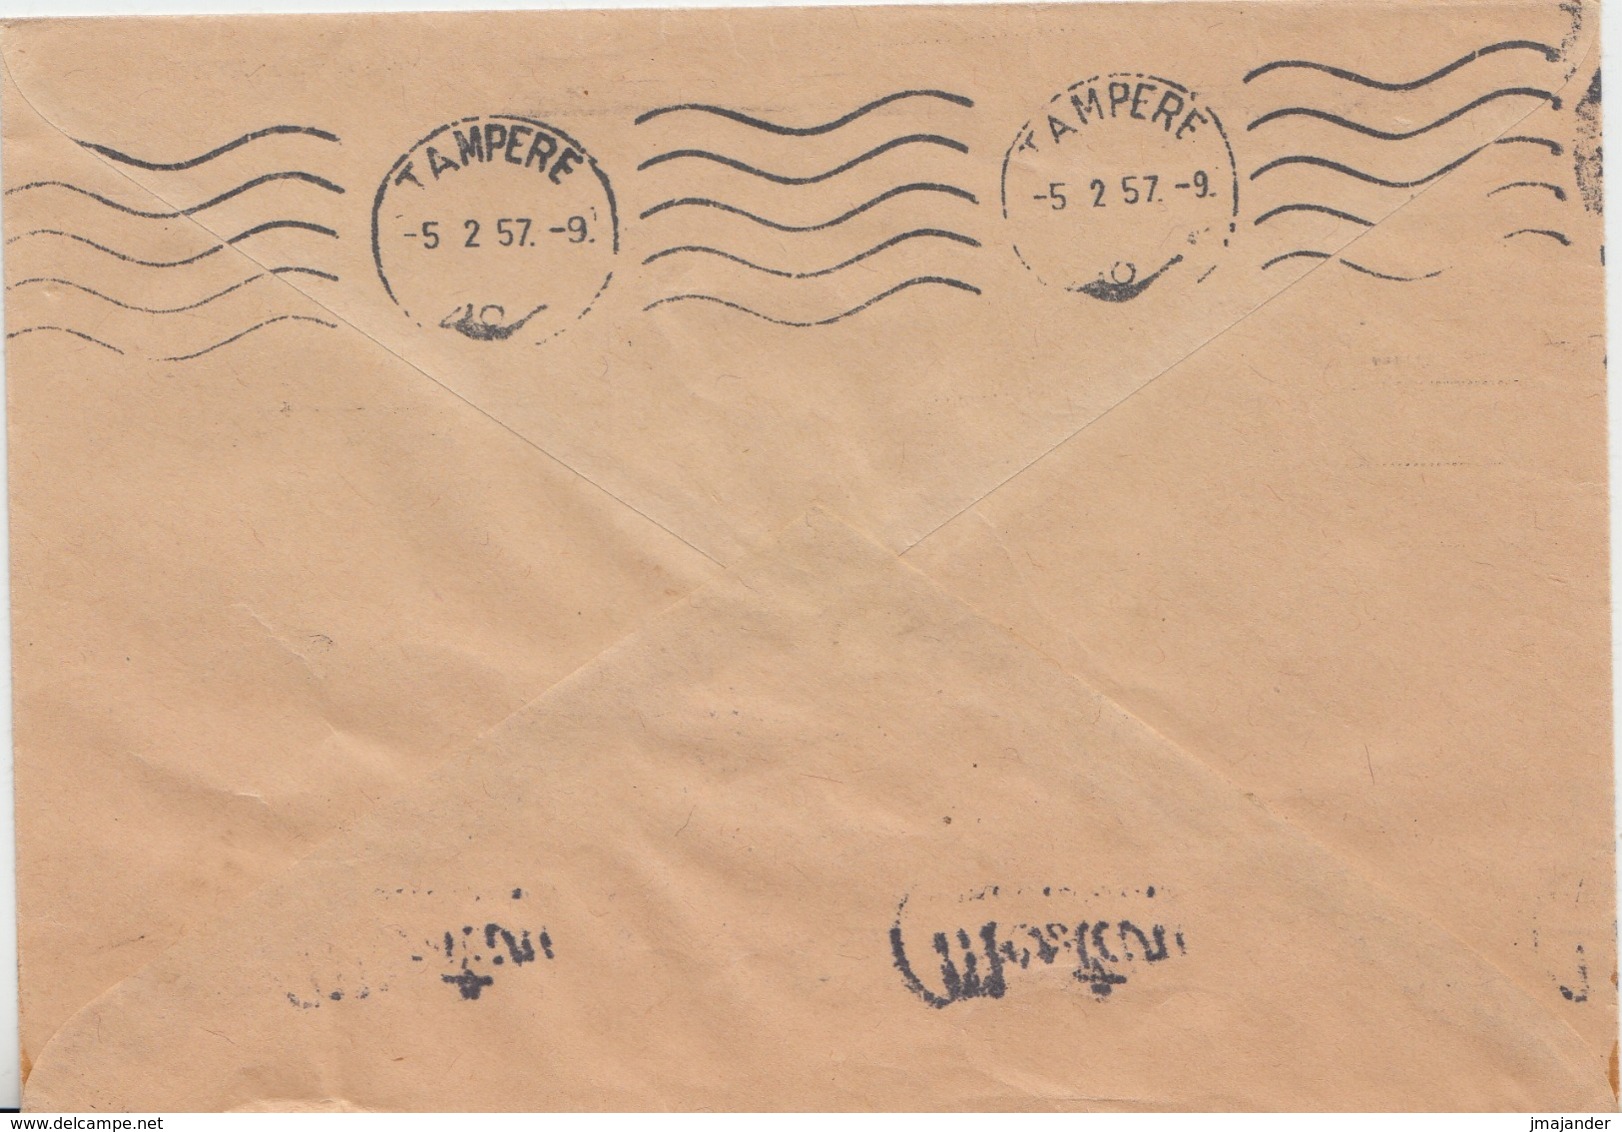 Finland 1957 - Official Postal Cover With Mechanical Cancellation Advertising Macaroni - Service